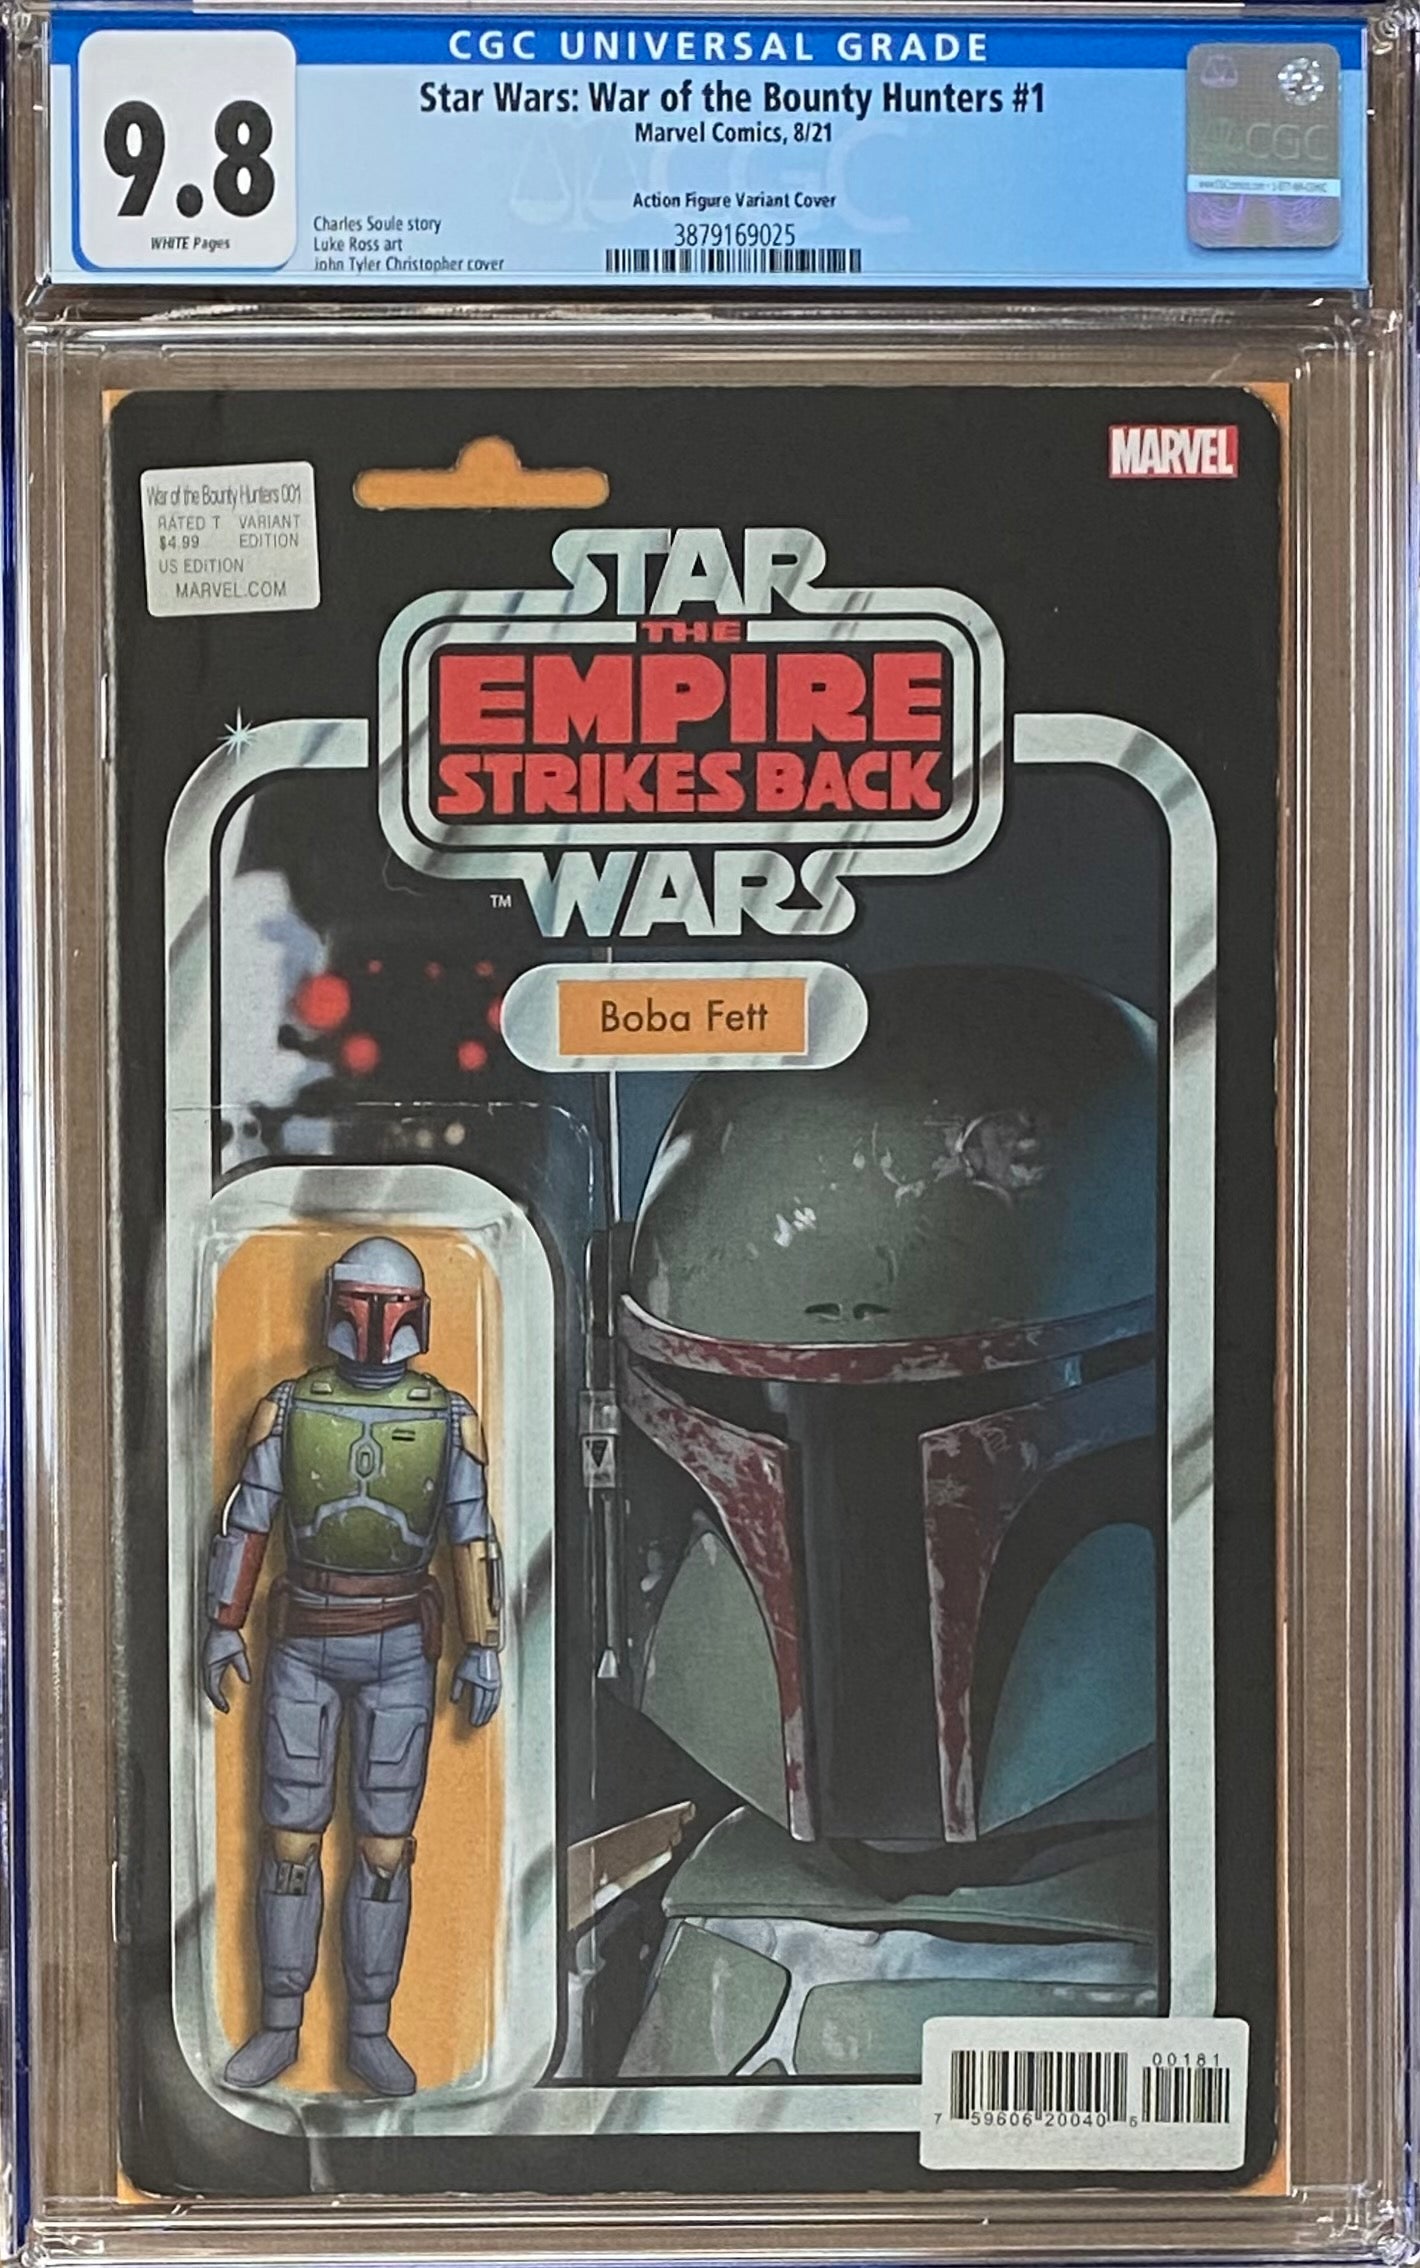 Star Wars: War of the Bounty Hunters #1 Action figure Variant CGC 9.8